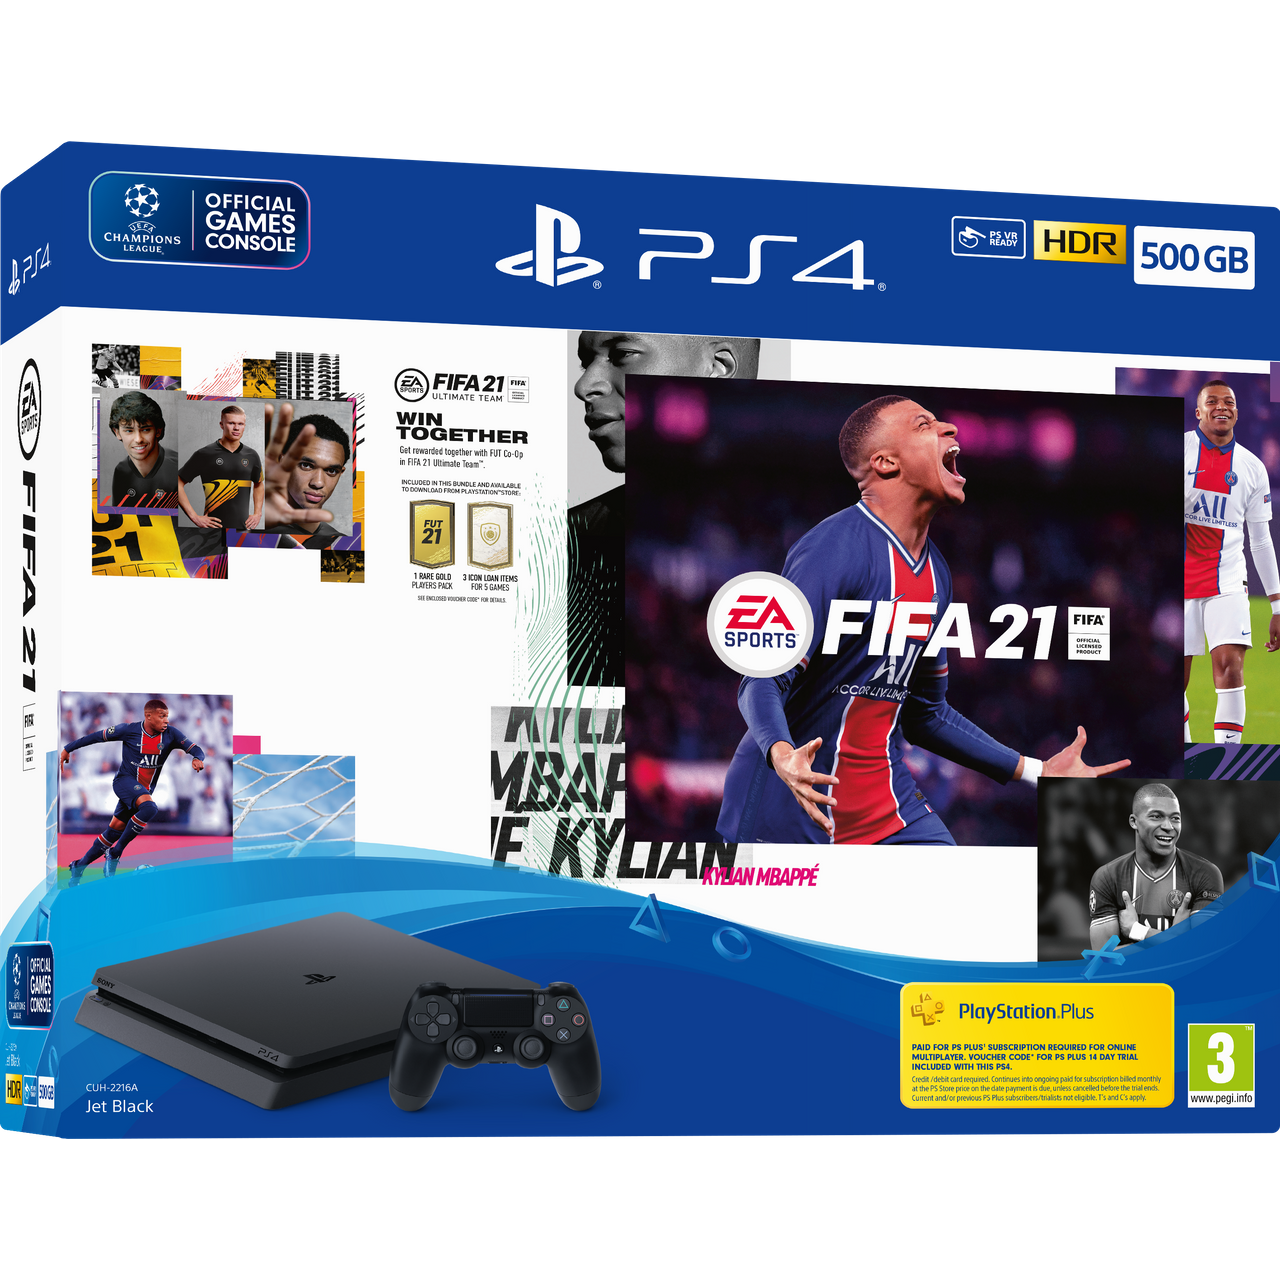 PlayStation 4 500GB with Fifa 21 (Disc) Review